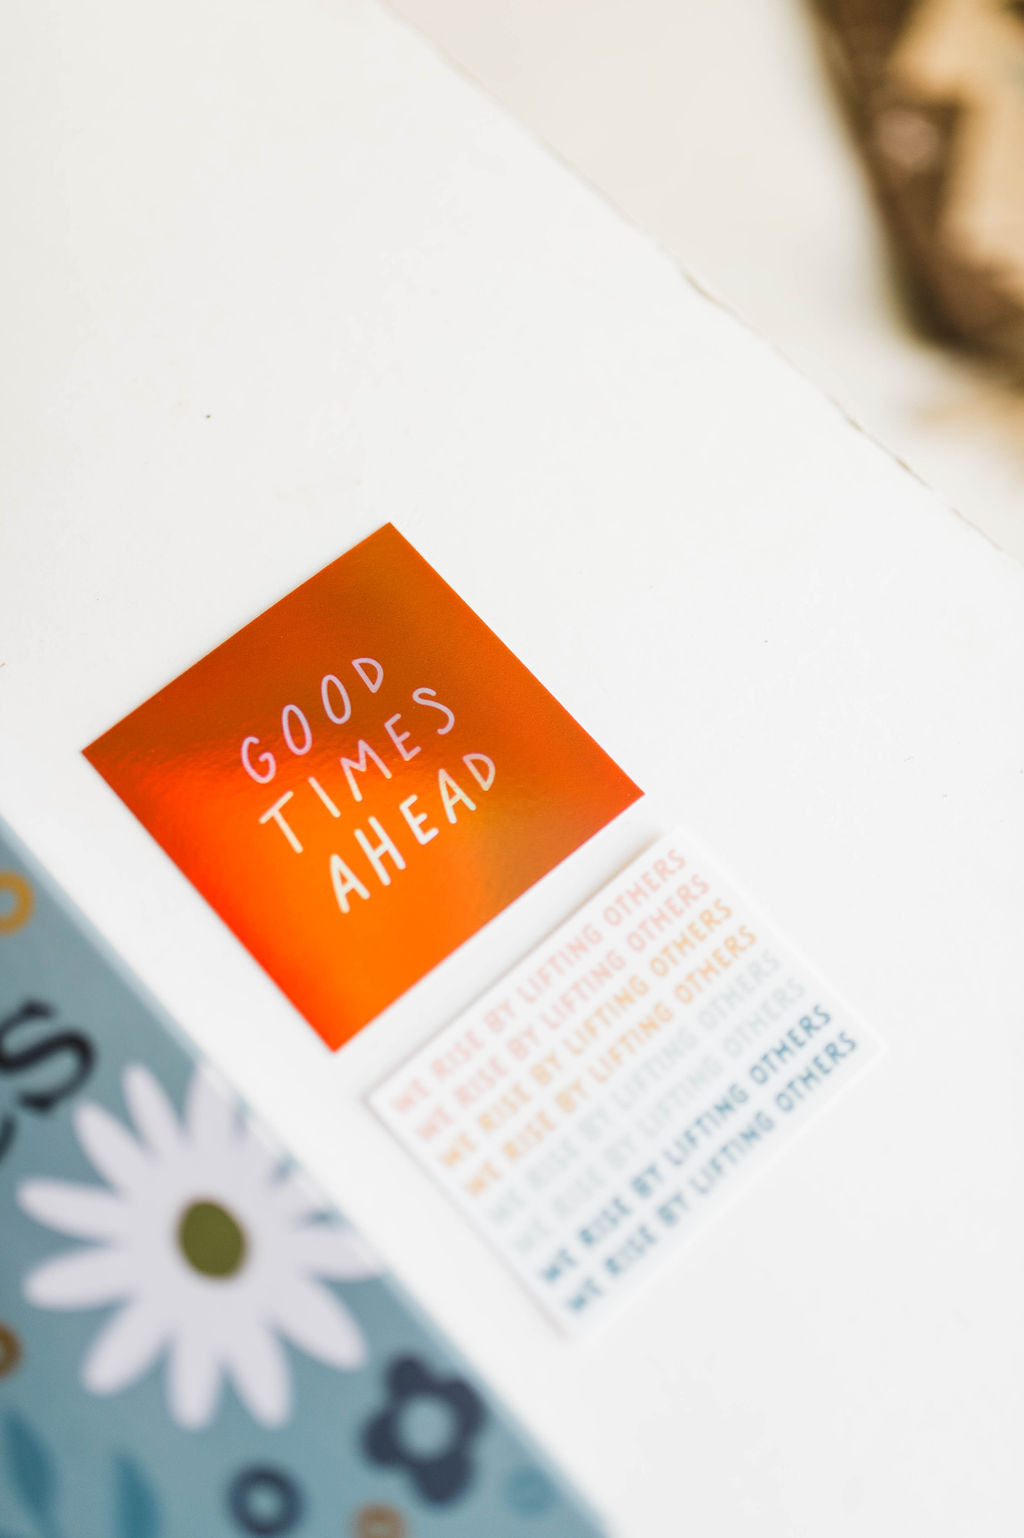 good times ahead holographic | sticker